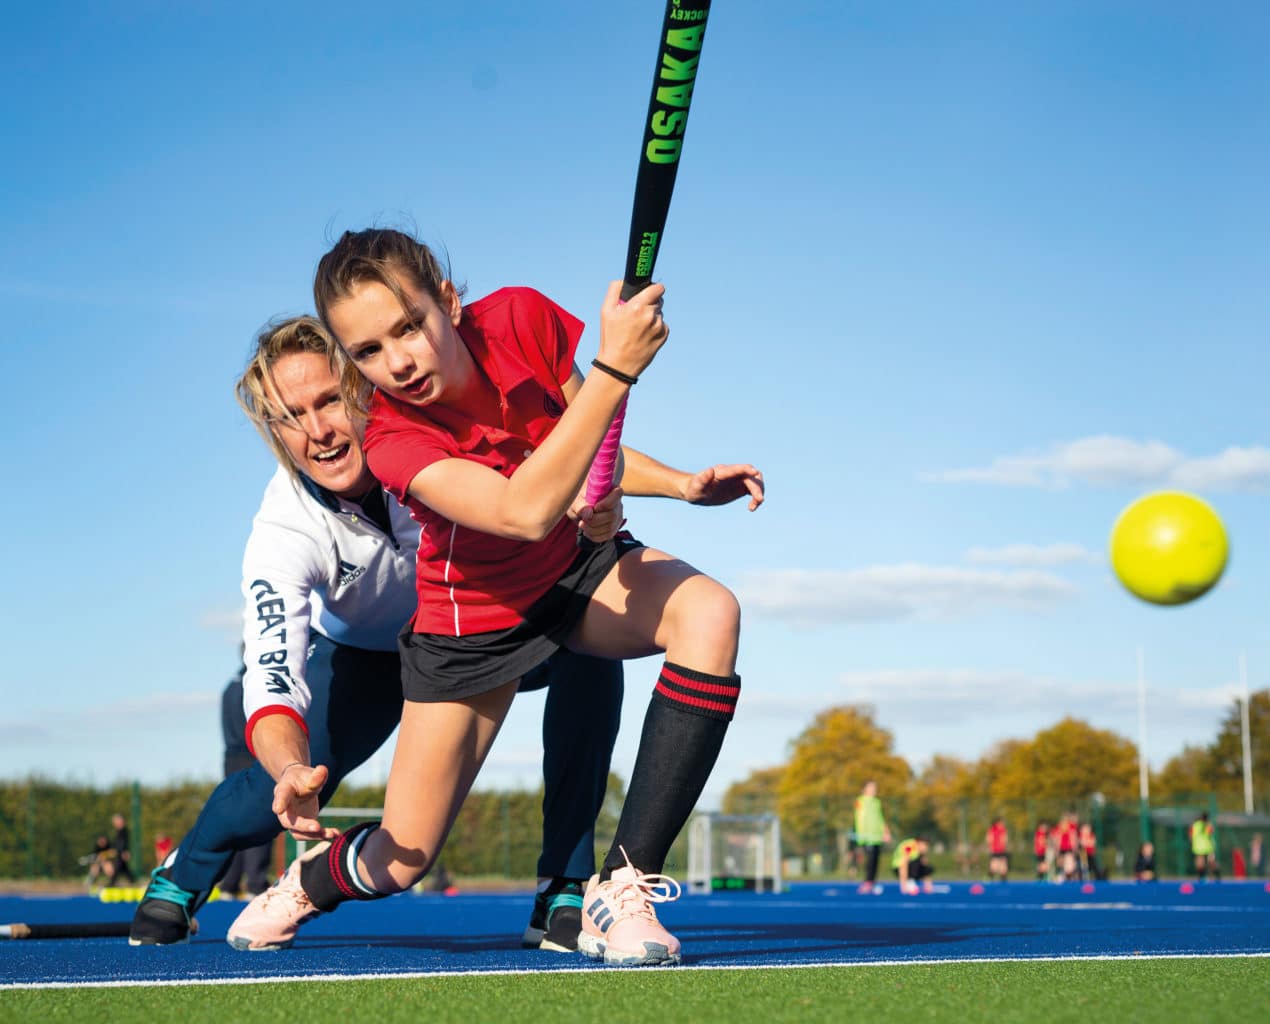 Crista Cullen Opens The New Hockey Pitch At Oakham School, Th September